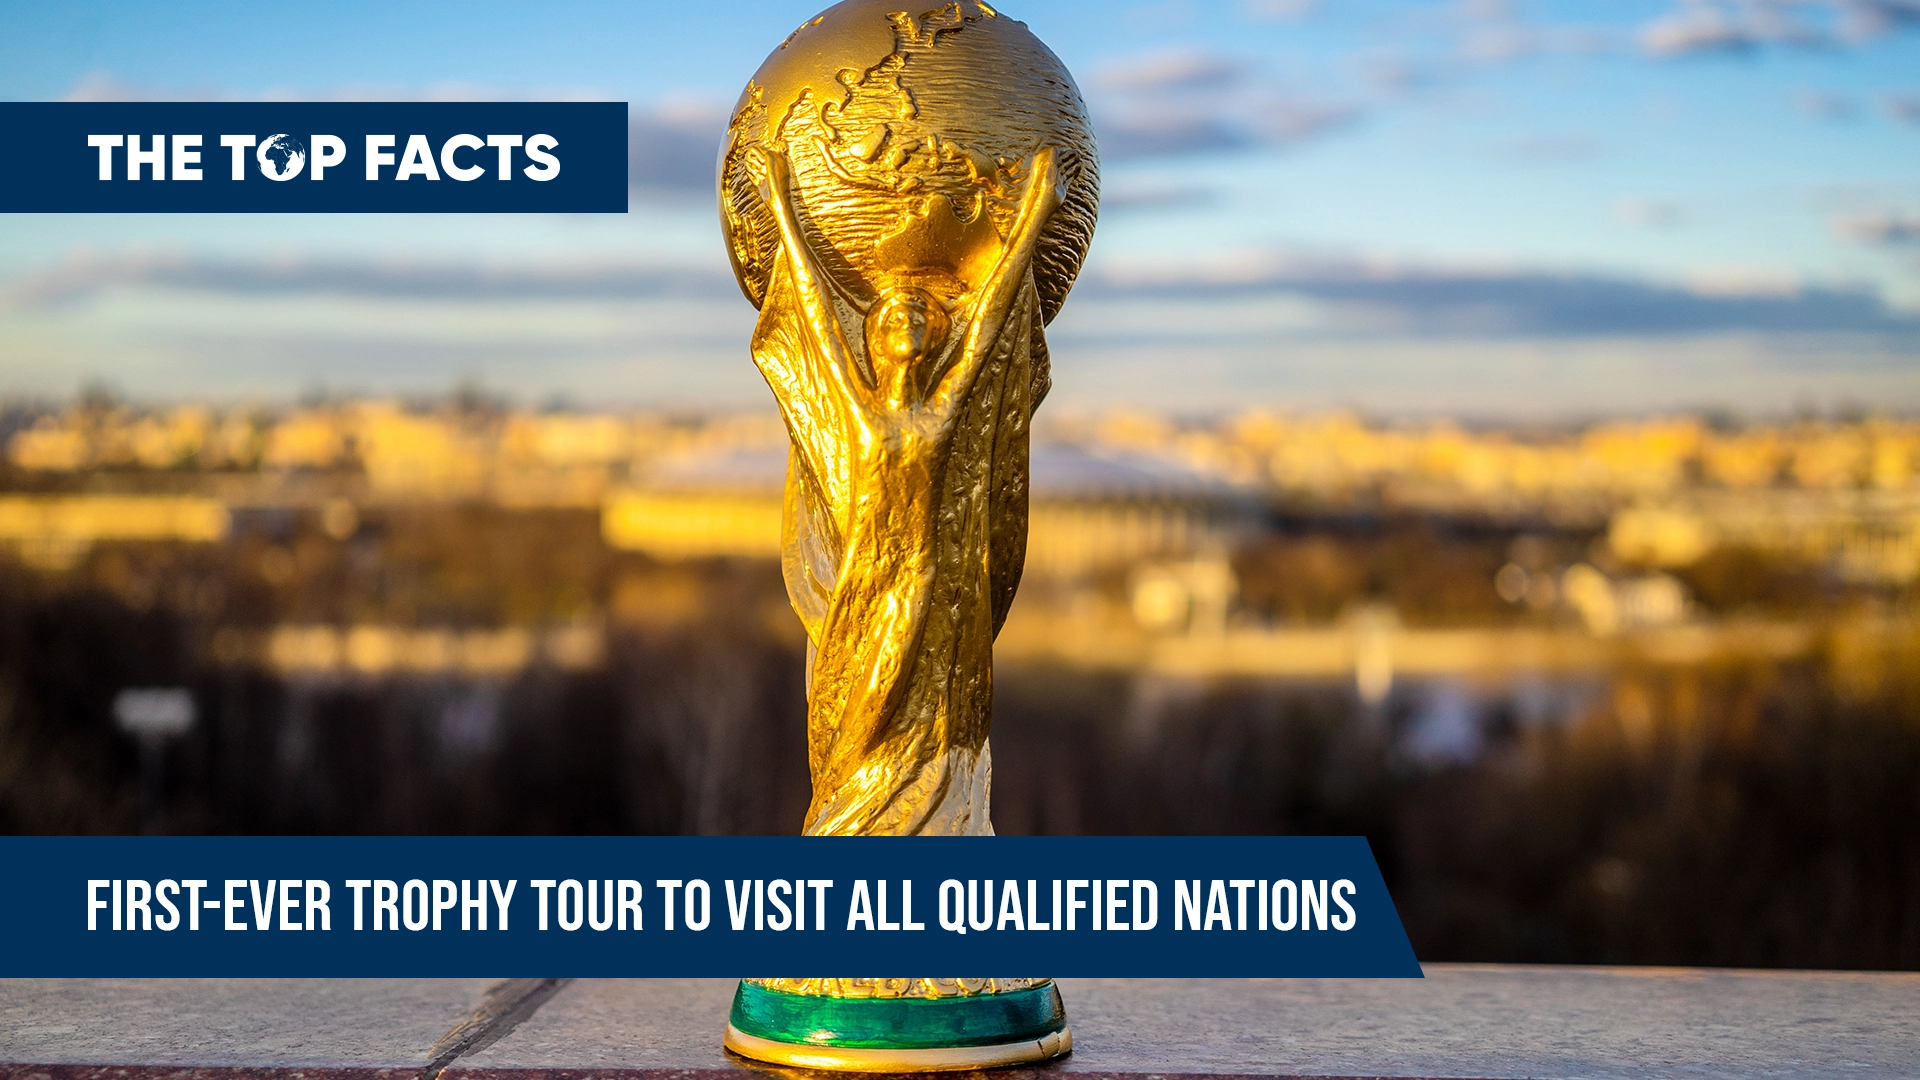 Global Trophy Tour Makes History by Visiting All Qualified Countries